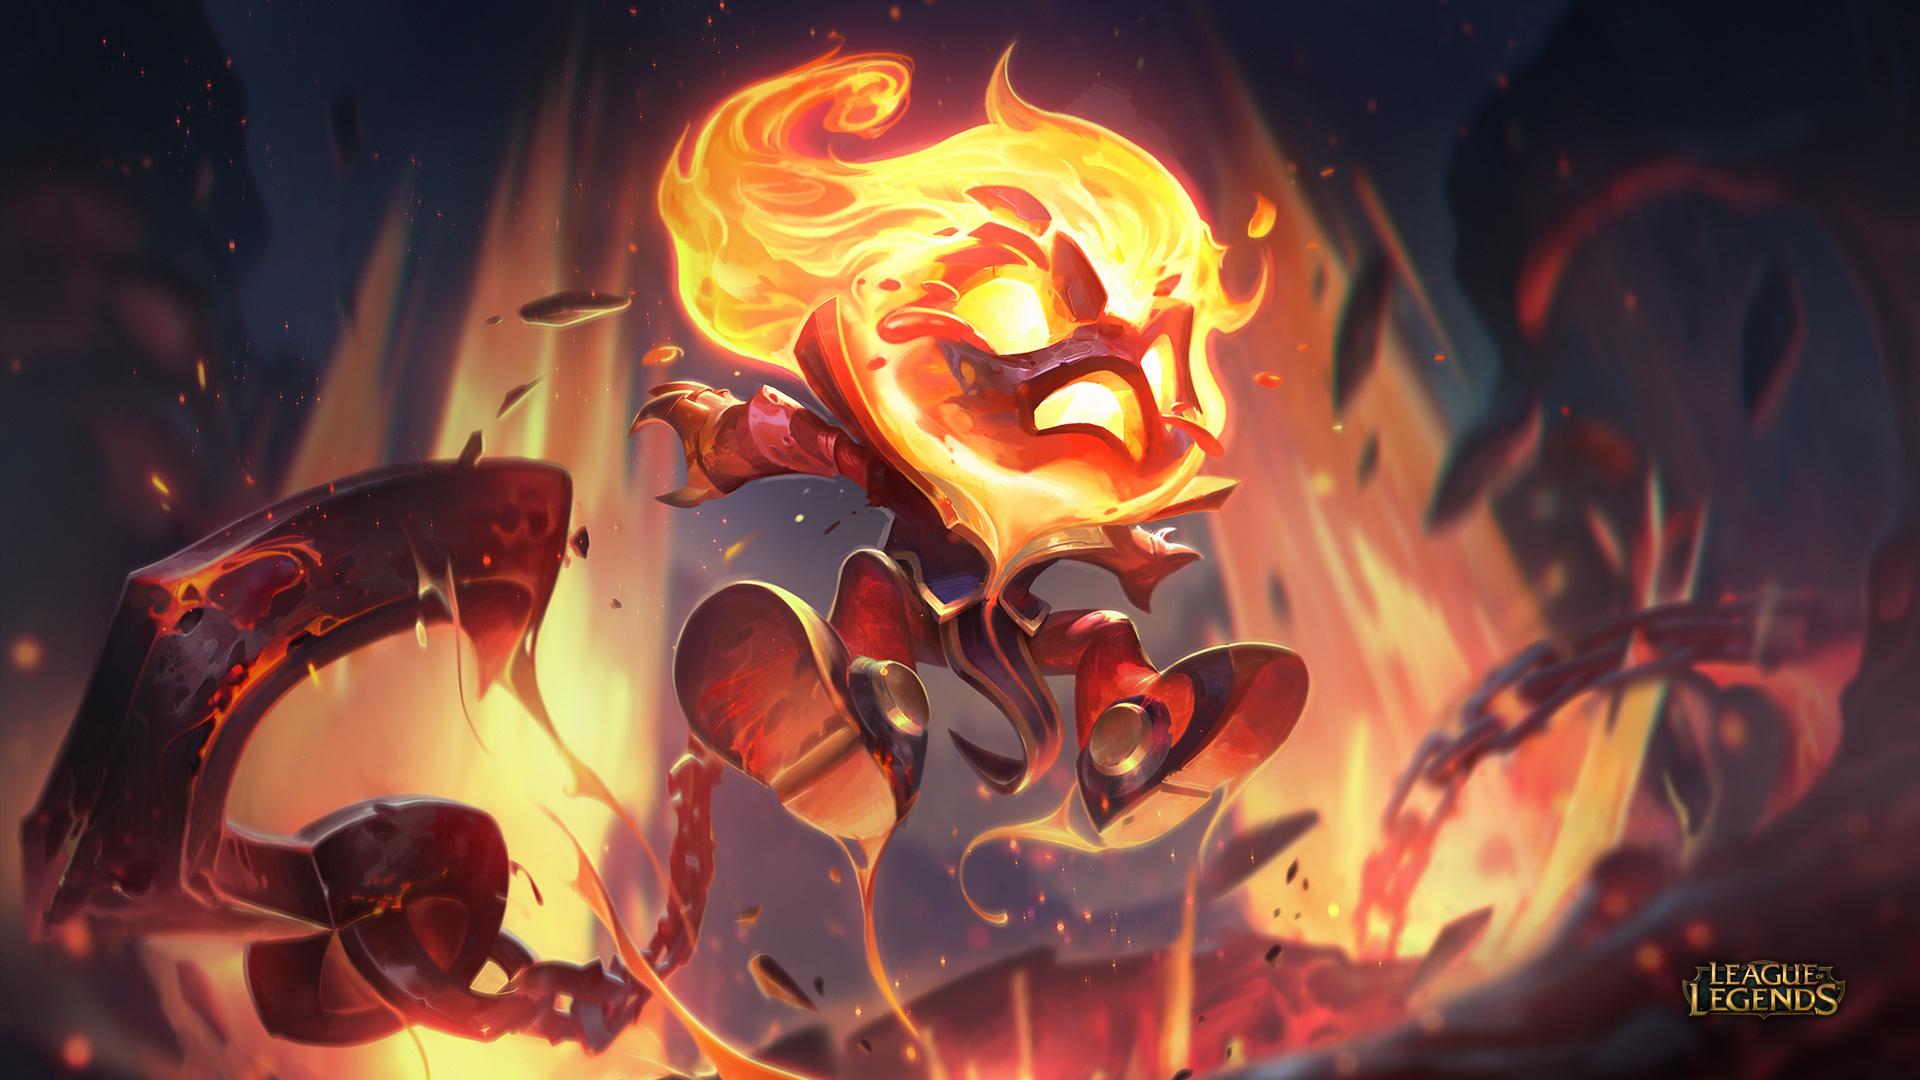 General 1920x1080 Summoner's Rift video games League of Legends Amumu (League of Legends) Riot Games video game characters